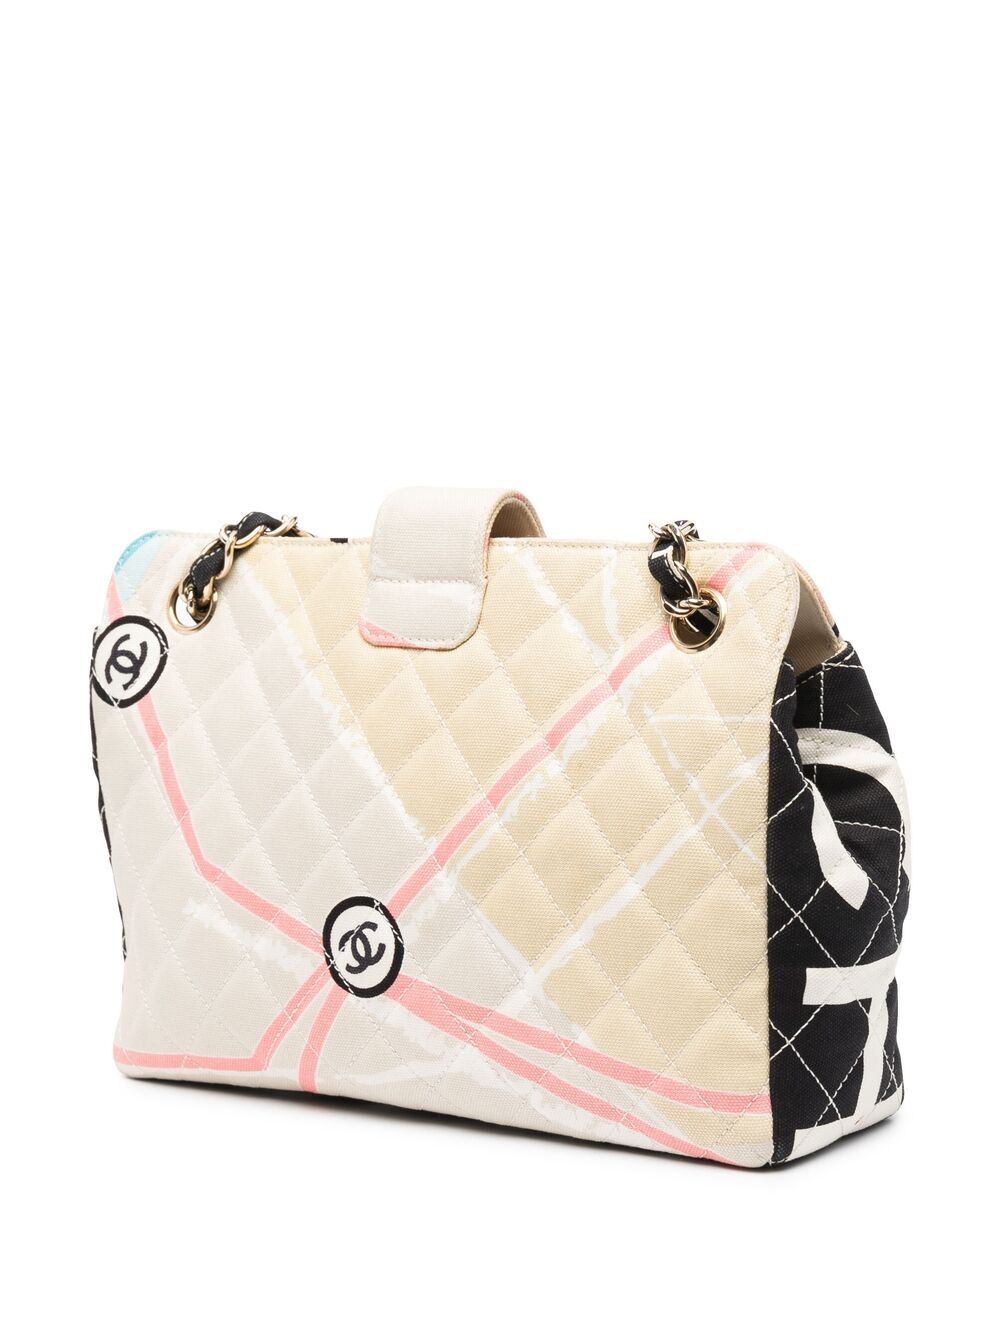 Sale - Women's Chanel Shoulder Bags ideas: up to −55%